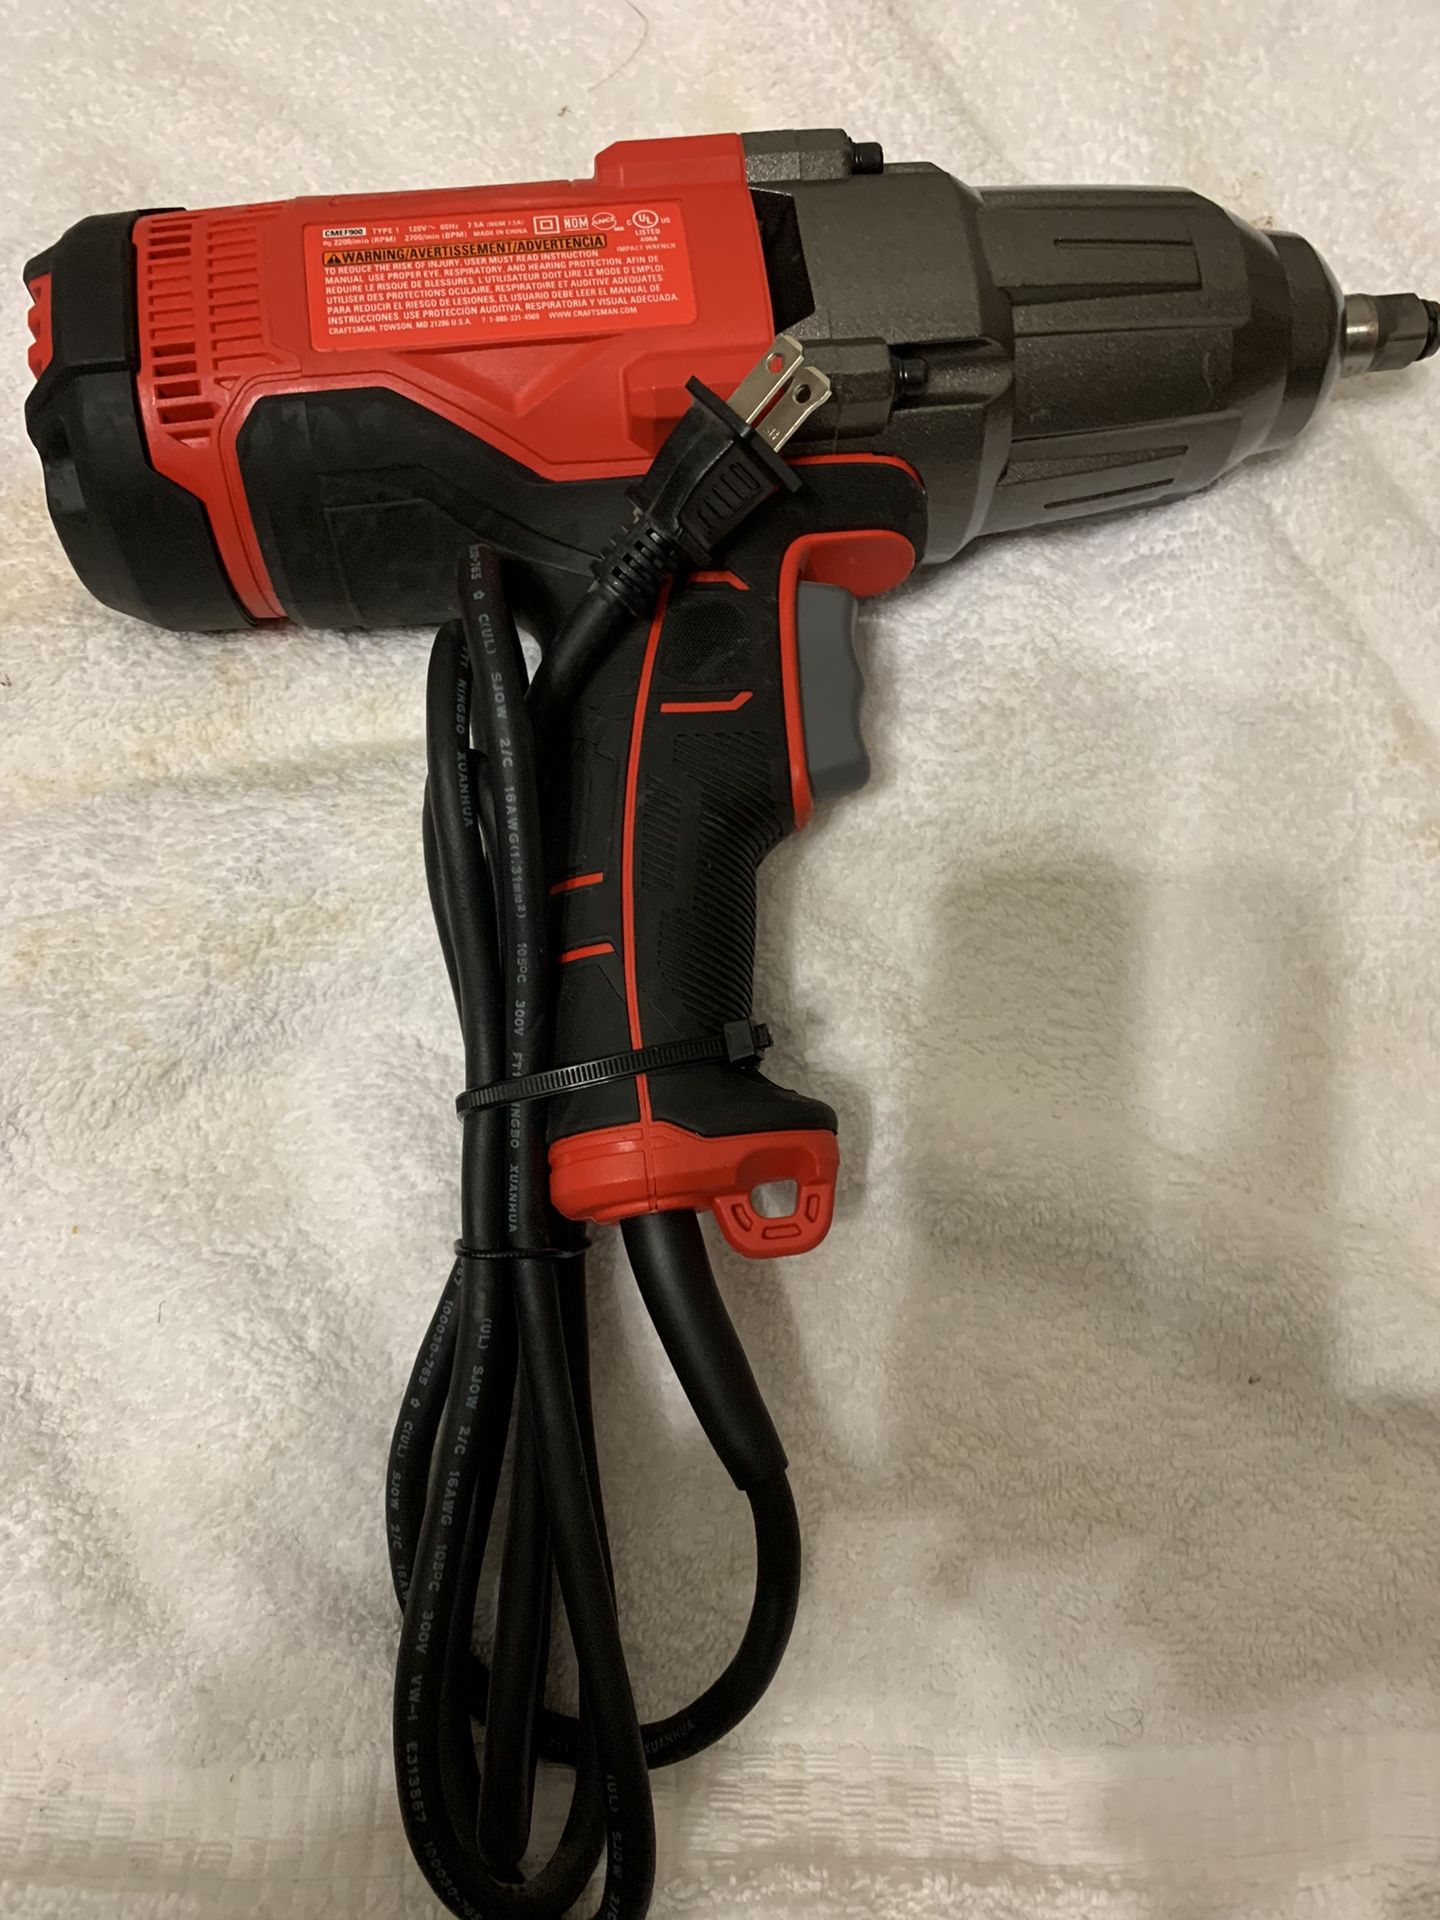 CRAFTSMAN 7.5 Amps-Amp Variable Speed 1/2-in Drive Corded Impact Wrench